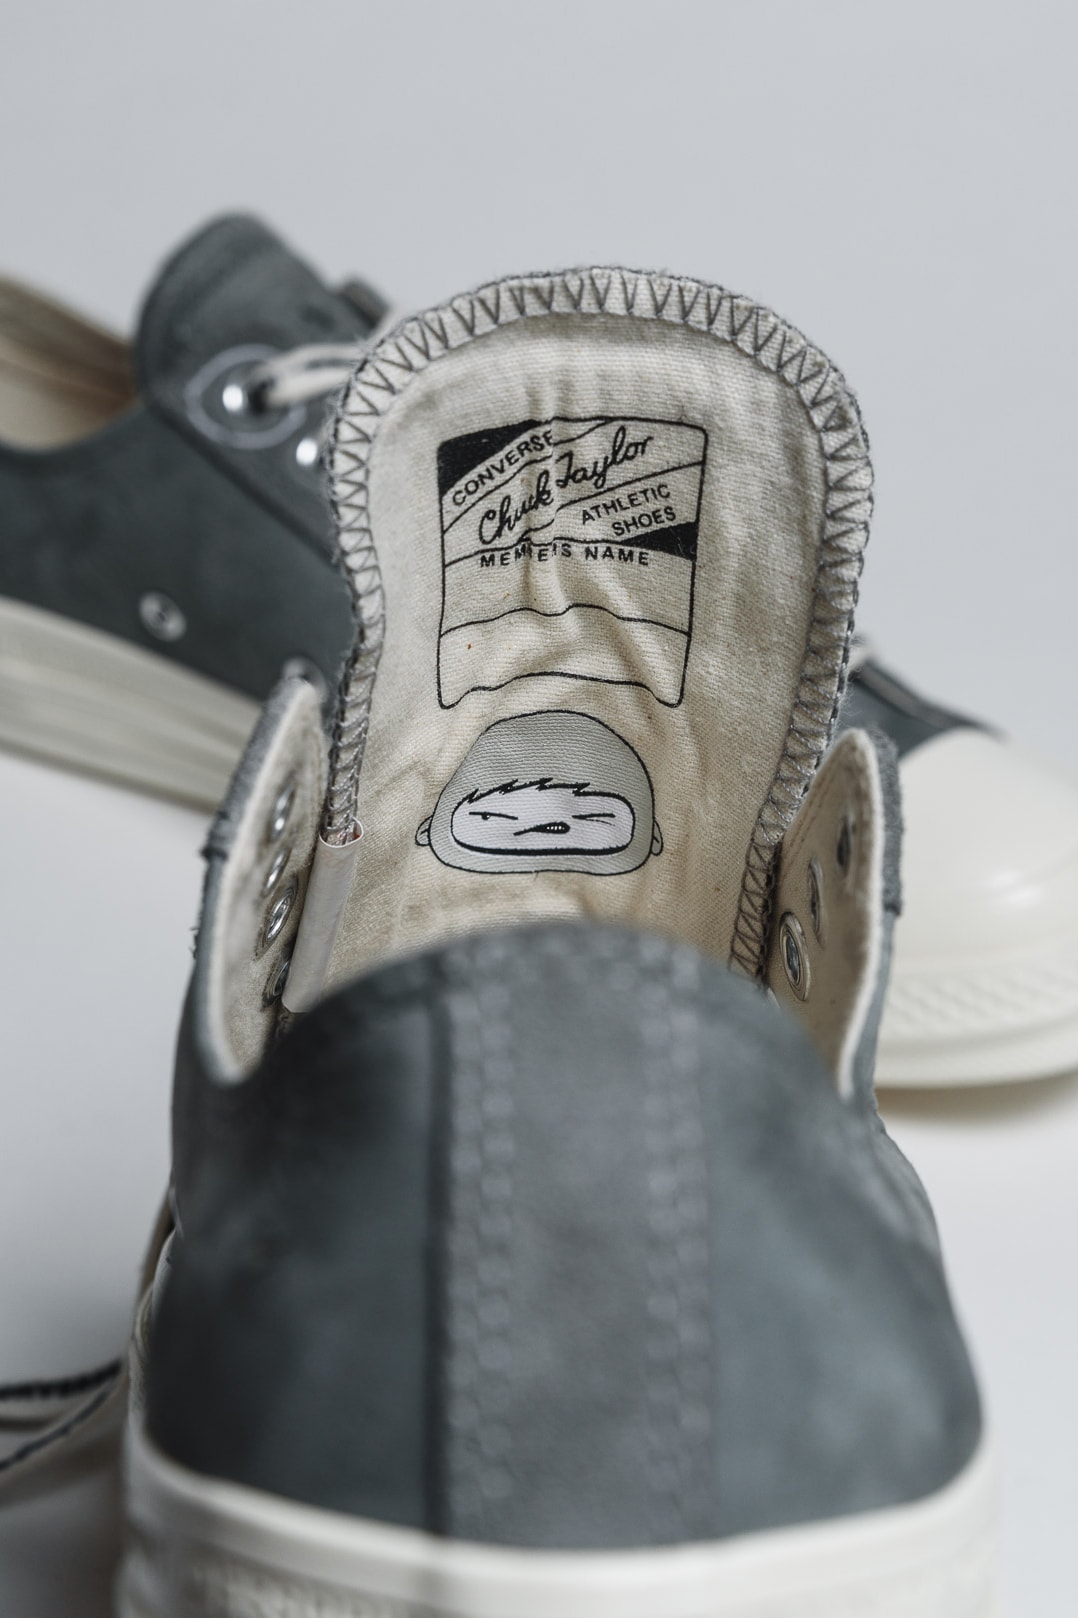 Offspring x Converse "Community Chuck 70s" PArt II Pack High Top Low Sneaker Release Information United Kingdom UK Store Limited Edition Collaboration Grey Muted Leather Nubuck All Star Lightning Bolt